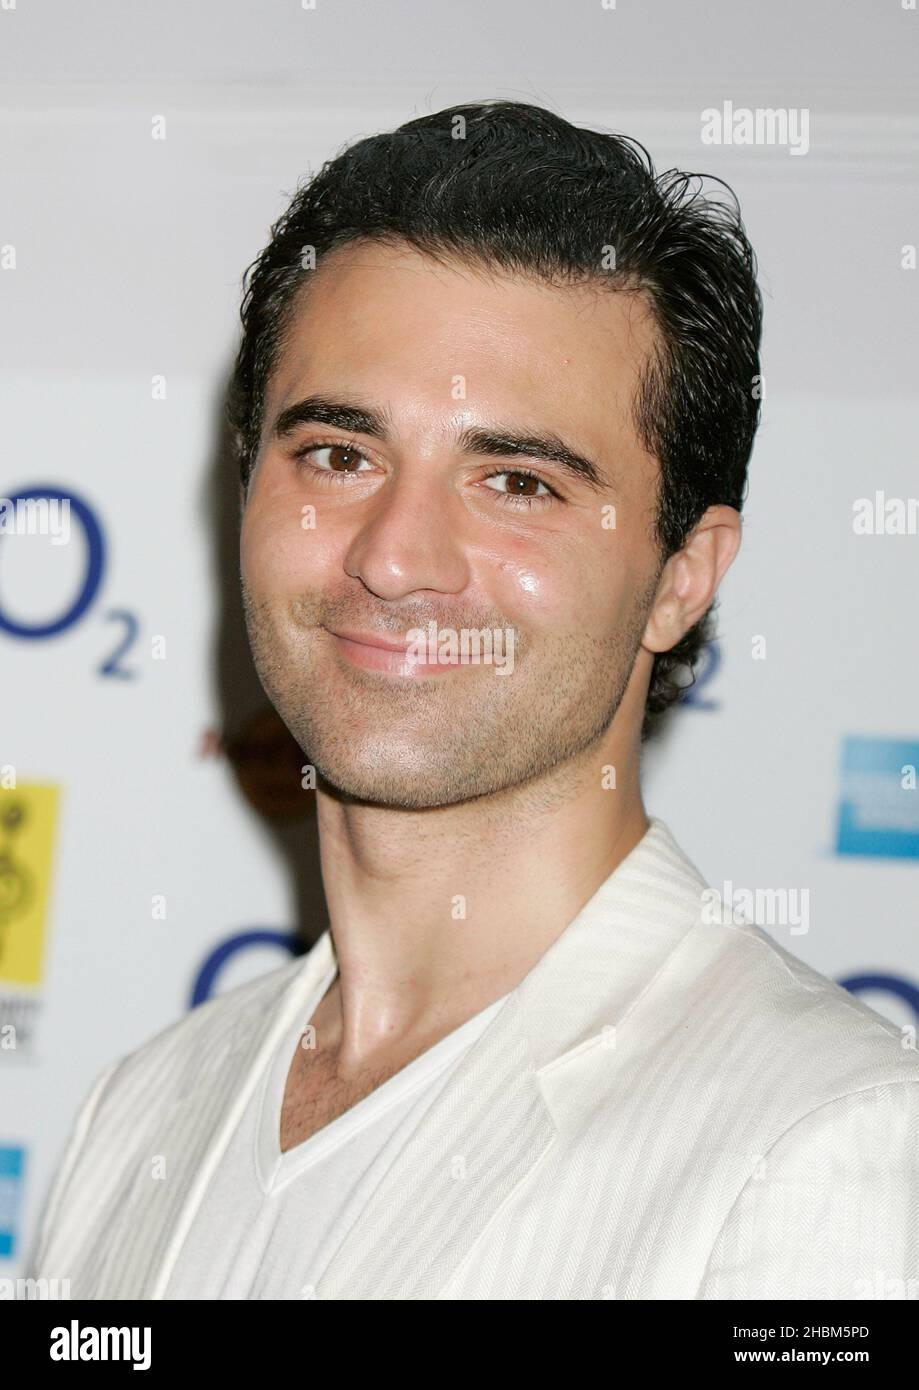 Darius arrives at the Silver Cleff Awards at the Hilton Hotel,Park Lane,London Stock Photo